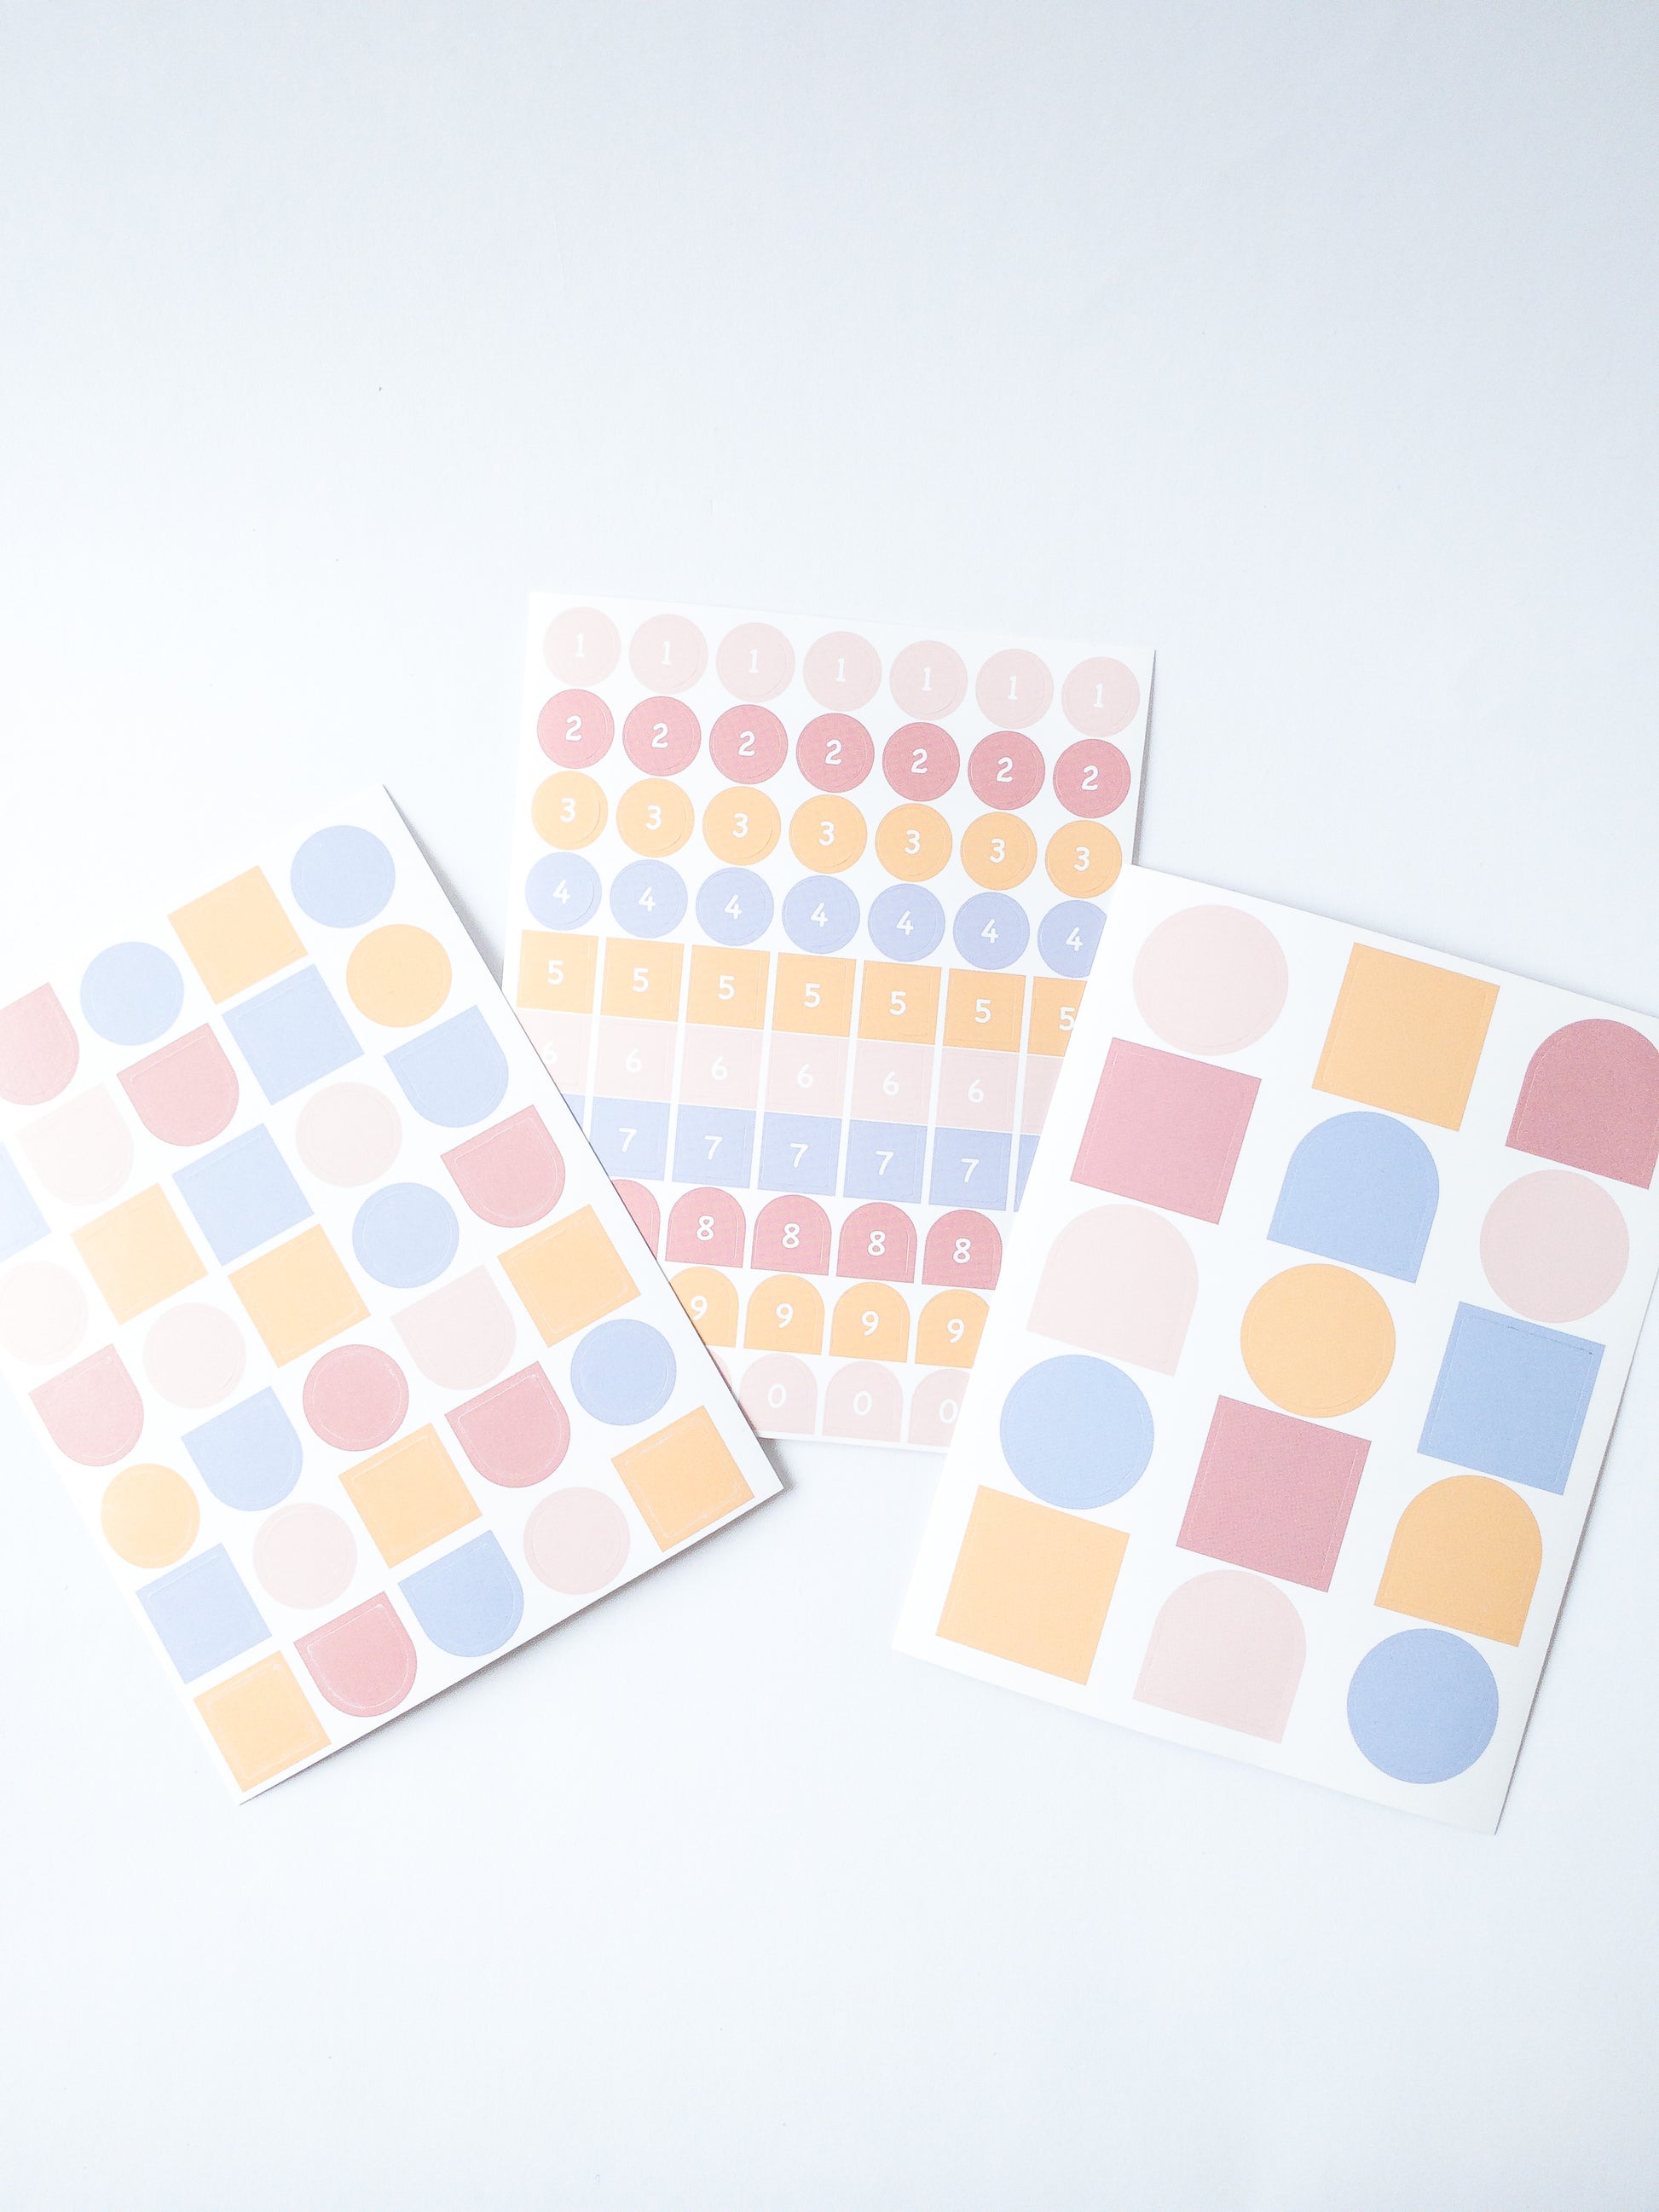 120 Korean style stickers! Three sheets of shapes and numbers in pretty pastel colors. There are 70 mini number stickers, 35 medium-sized shape stickers and 15 large shape stickers.